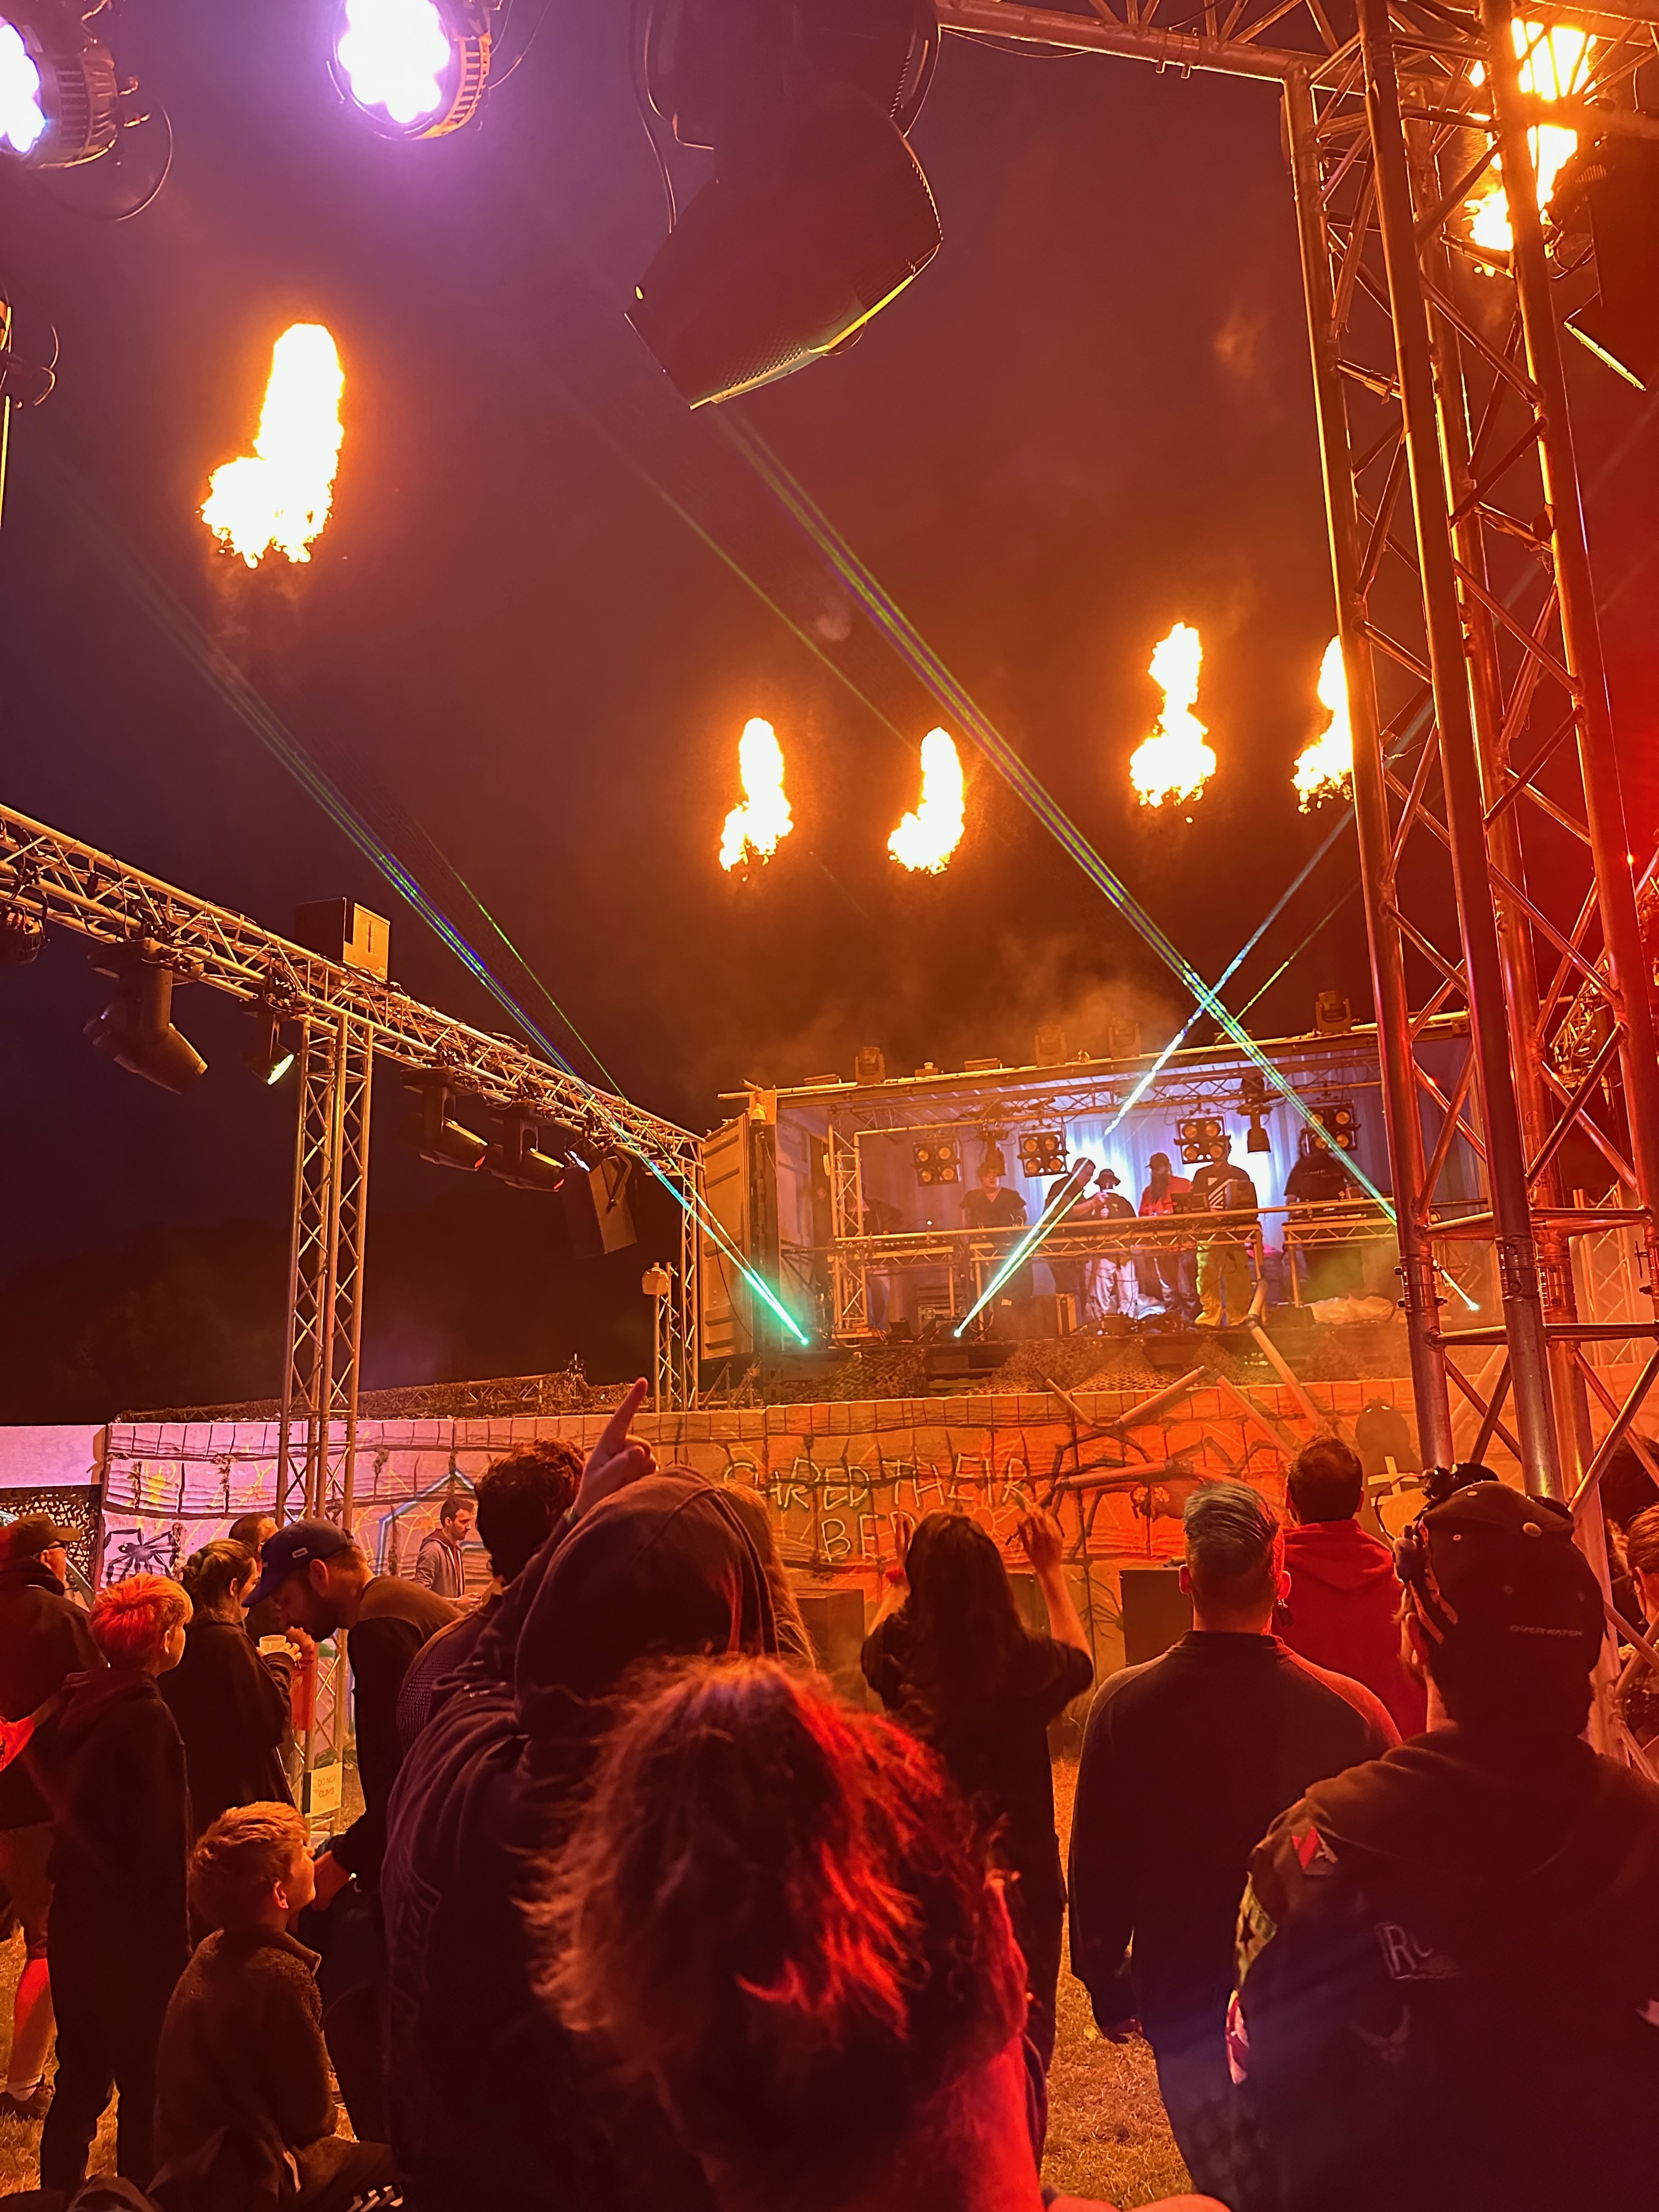 A photo looking over the dance floor. A raised DJ booth stands at the front of the dance floor, green lasers projected from its base. Behind the perimiter fire torches light the scene.